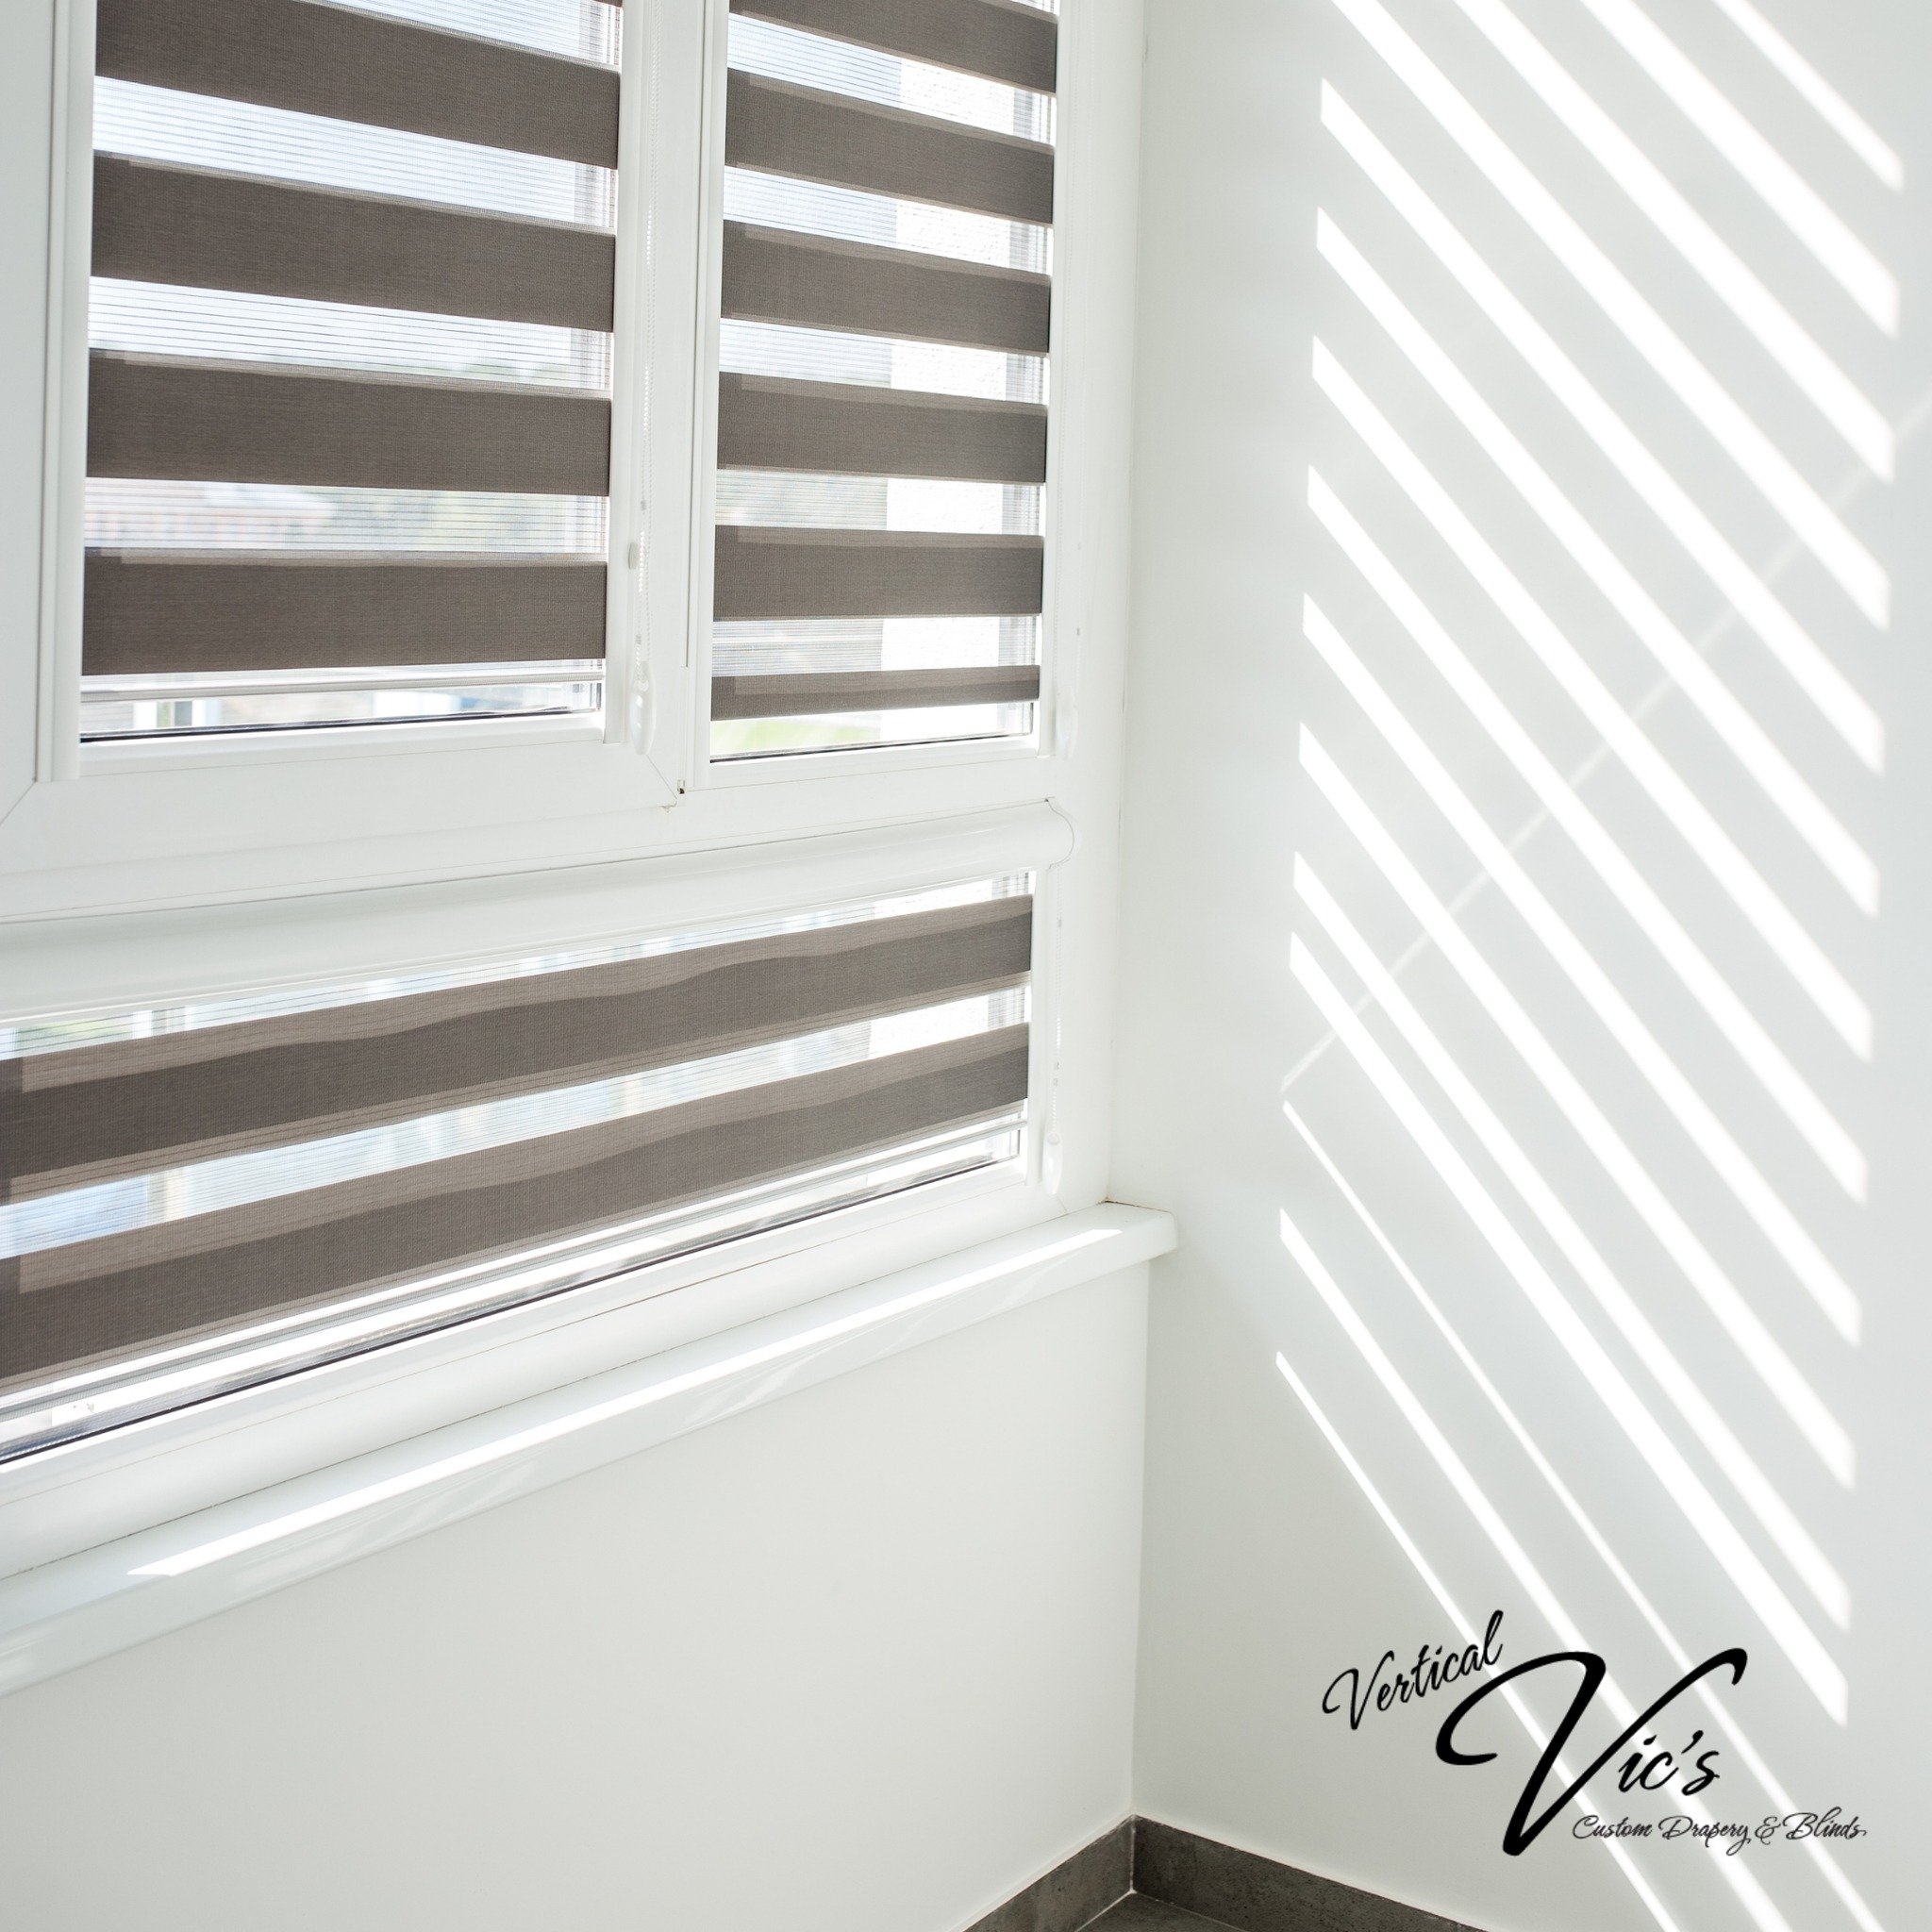 Dream in layers with our breathtaking banded shades! Combining the elegance of sheer fabric with the practicality of blackout, our zebra shades effortlessly transform any space. Let natural light dance through your home while maintaining your privacy